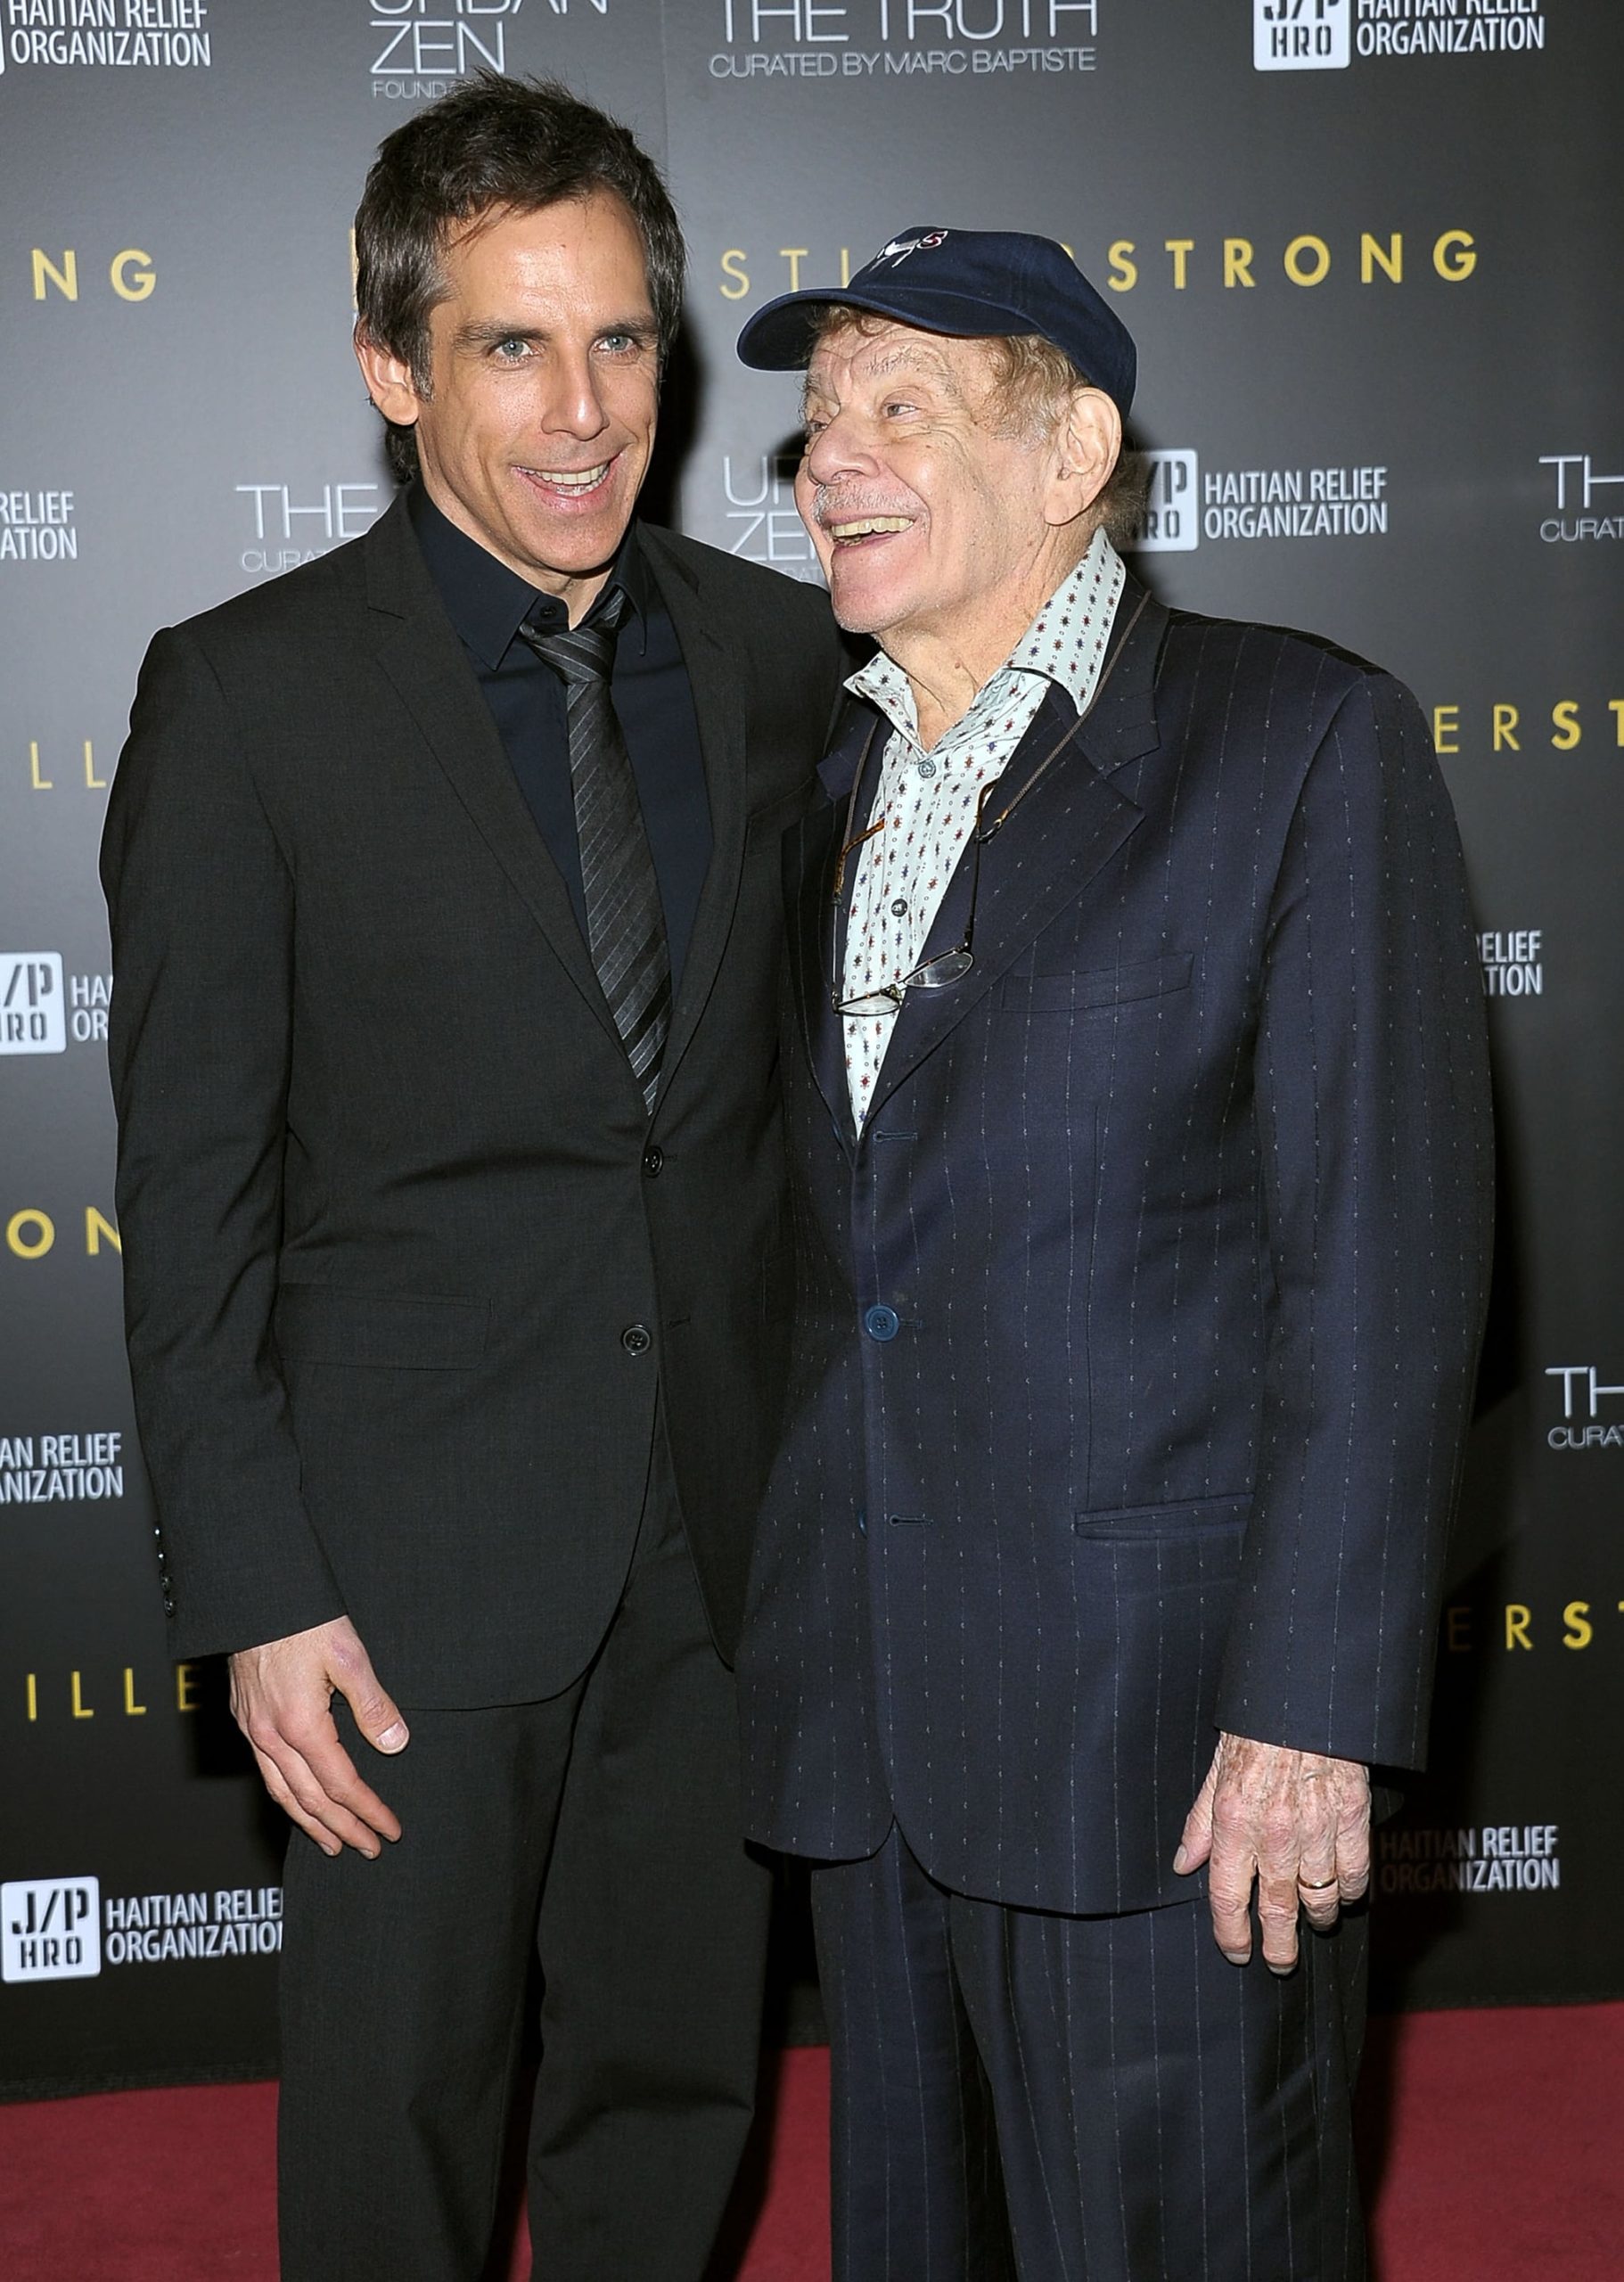 NEW YORK, NY - FEBRUARY 11: Ben Stiller and Jerry Stiller arrive at the HELP HAITI benefiting The Ben Stiller Foundation and The J/P Haitian Relief Organization at the Urban Zen Center At Stephan Weiss Studio on February 11, 2011 in New York City.  (Photo by Michael Loccisano/Getty Images)